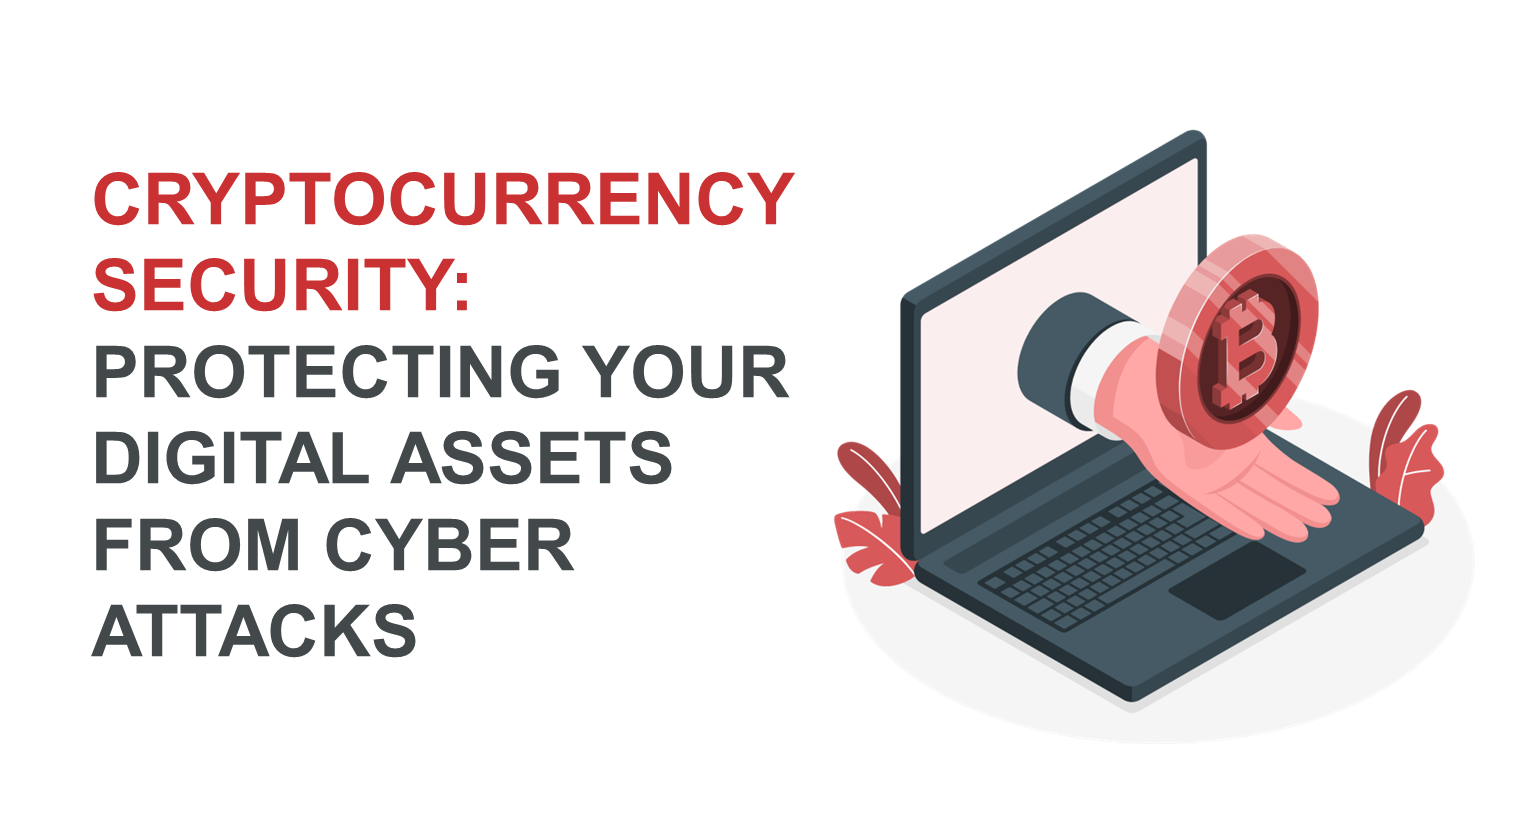 Cryptocurrency Security: Protecting Your Digital Assets from Cyber Attacks